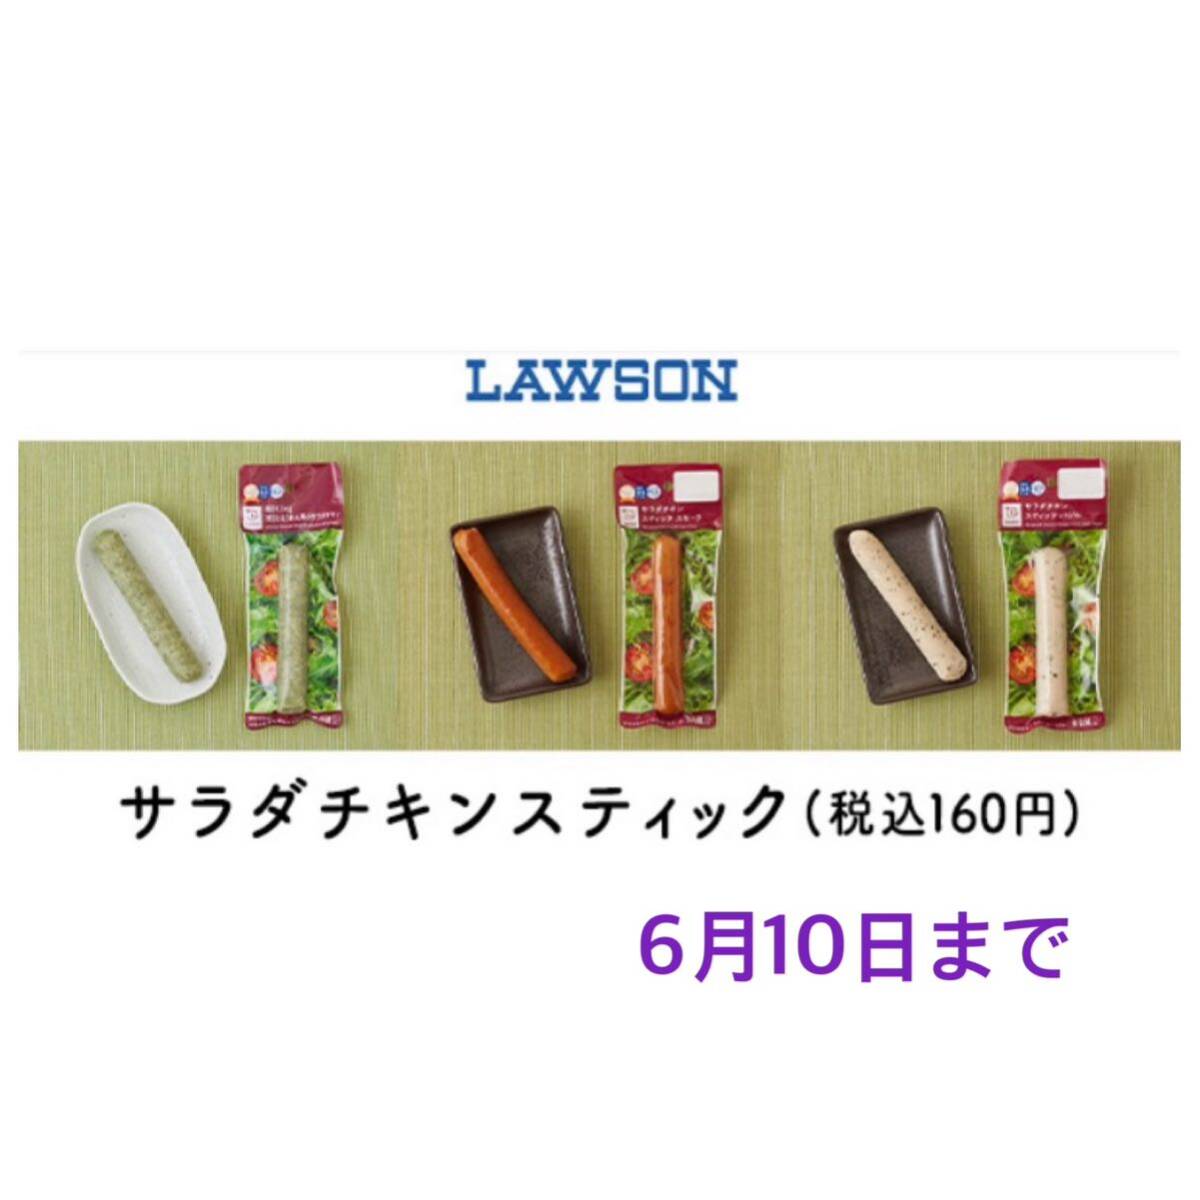  Lawson salad chi gold stick ( tax included 160 jpy ) free exchange ticket 